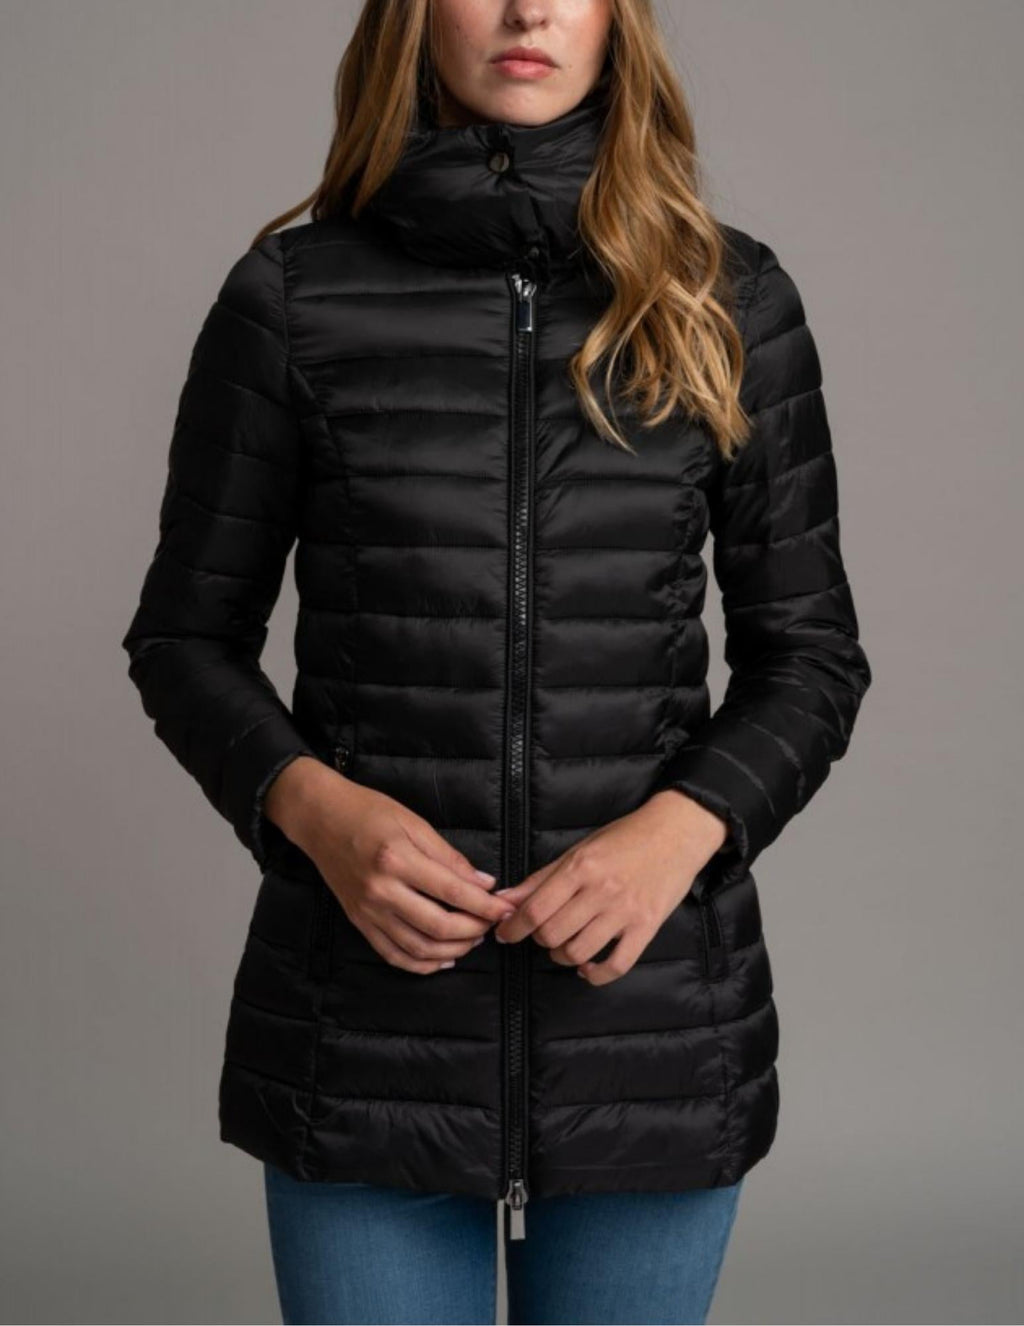 Women's Outerwear | Sweaters | Cardigans | Puffer Jackets | Trench Coat ...